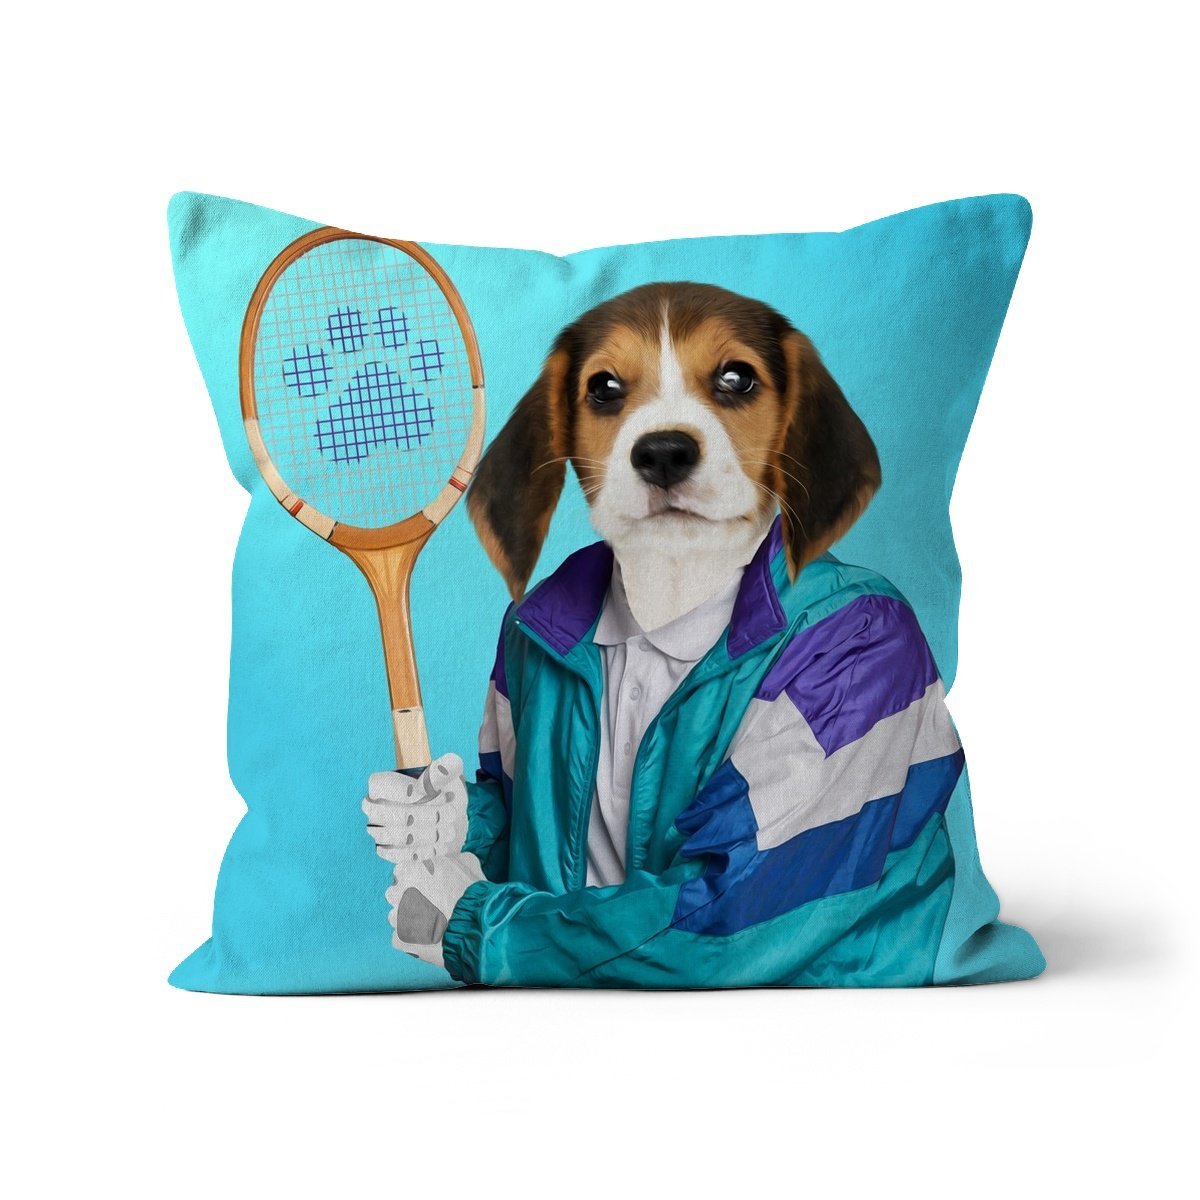 80s Tennis Champ: Custom Pet Cushion - Paw & Glory, dog portraits, pet portraits uk, paw & glory, custom pet portrait pillow,dog pillows personalized, pet face pillows, dog photo on pillow, custom cat pillows, pillow with pet picture